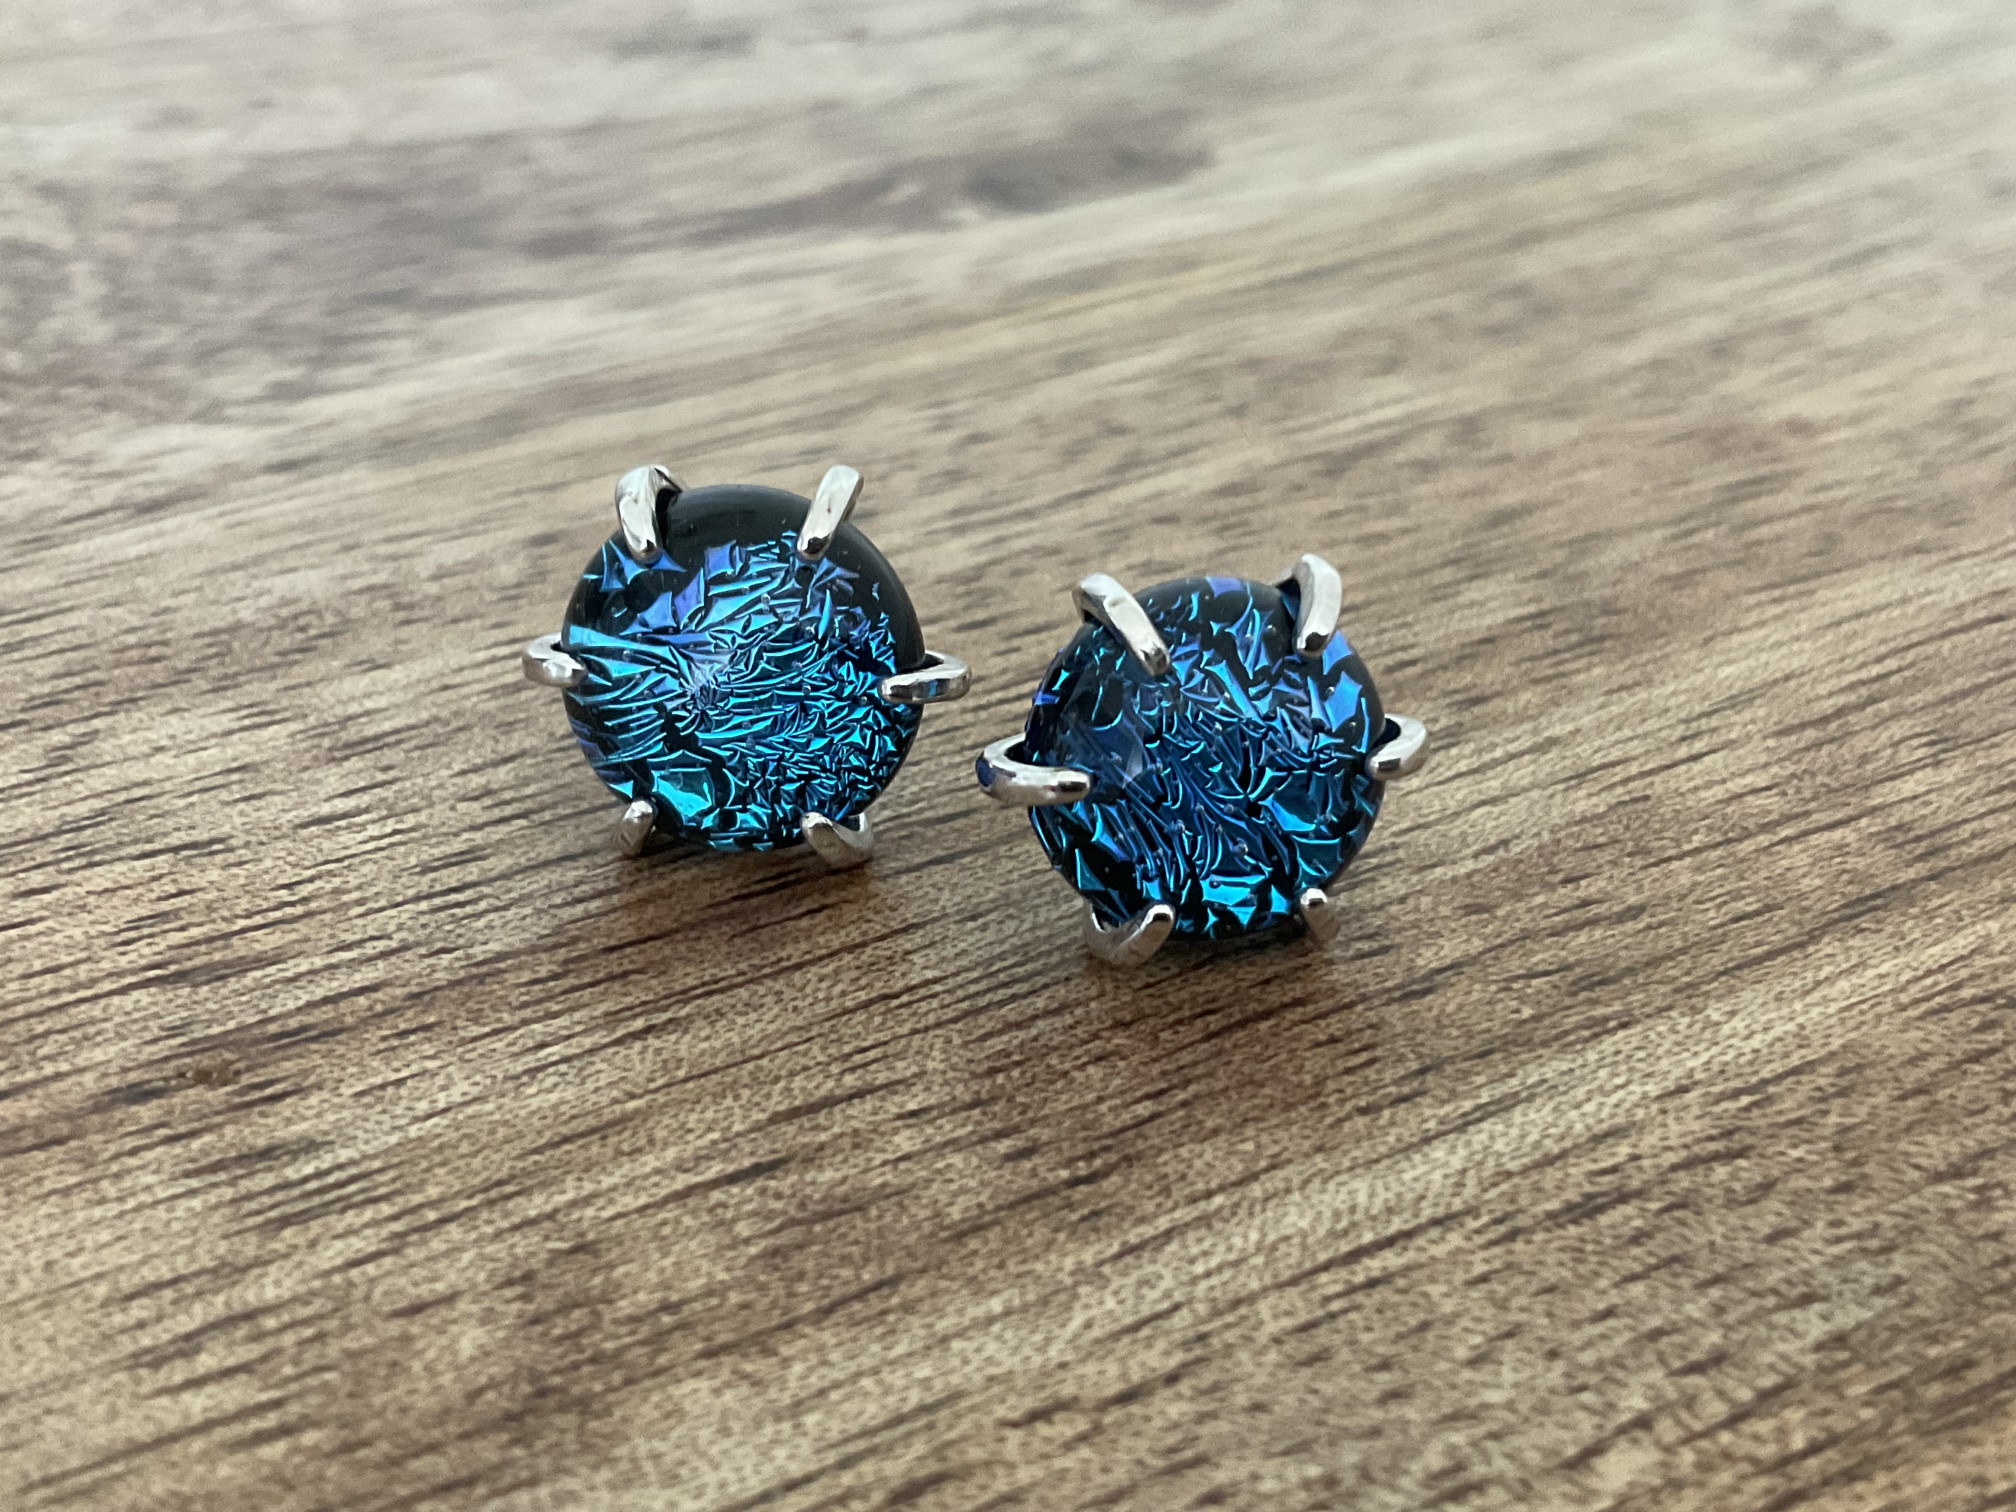 Blue Cracklized Dichroic Fused Glass Stud Earrings - Click Image to Close